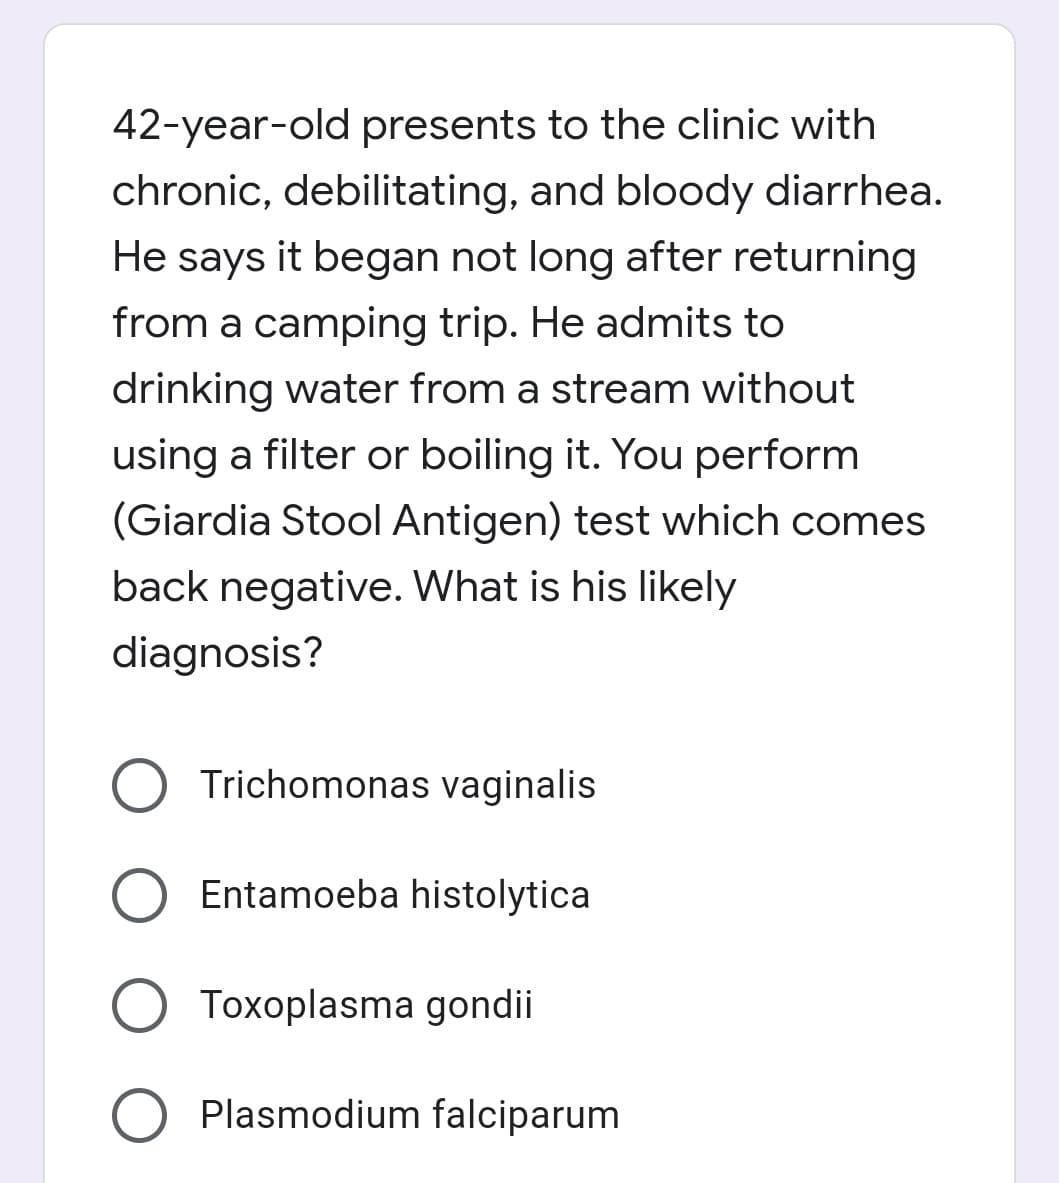 42-year-old presents to the clinic with
chronic, debilitating, and bloody diarrhea.
He says it began not long after returning
from a camping trip. He admits to
drinking water from a stream without
using a filter or boiling it. You perform
(Giardia Stool Antigen) test which comes
back negative. What is his likely
diagnosis?
Trichomonas vaginalis
Entamoeba histolytica
O Toxoplasma gondii
Plasmodium falciparum
